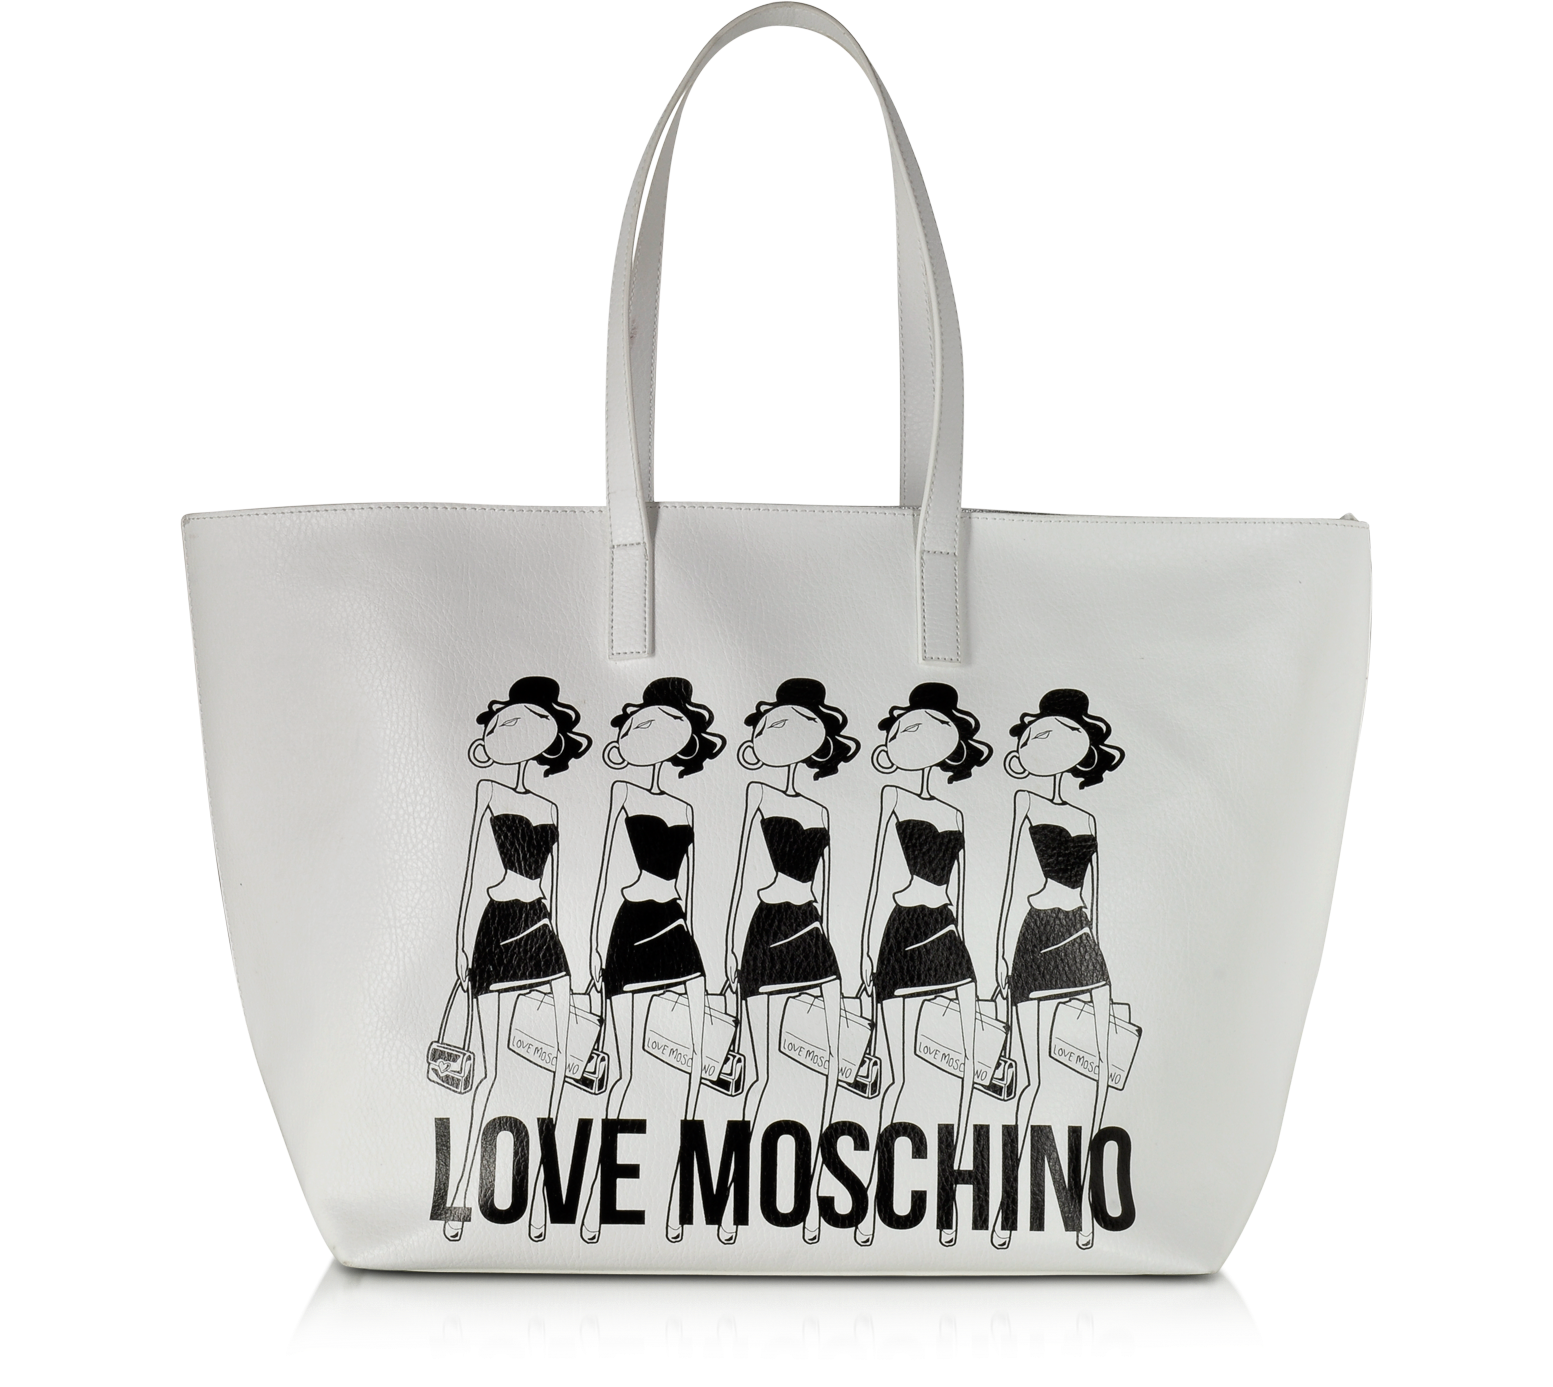 moschino large tote bag